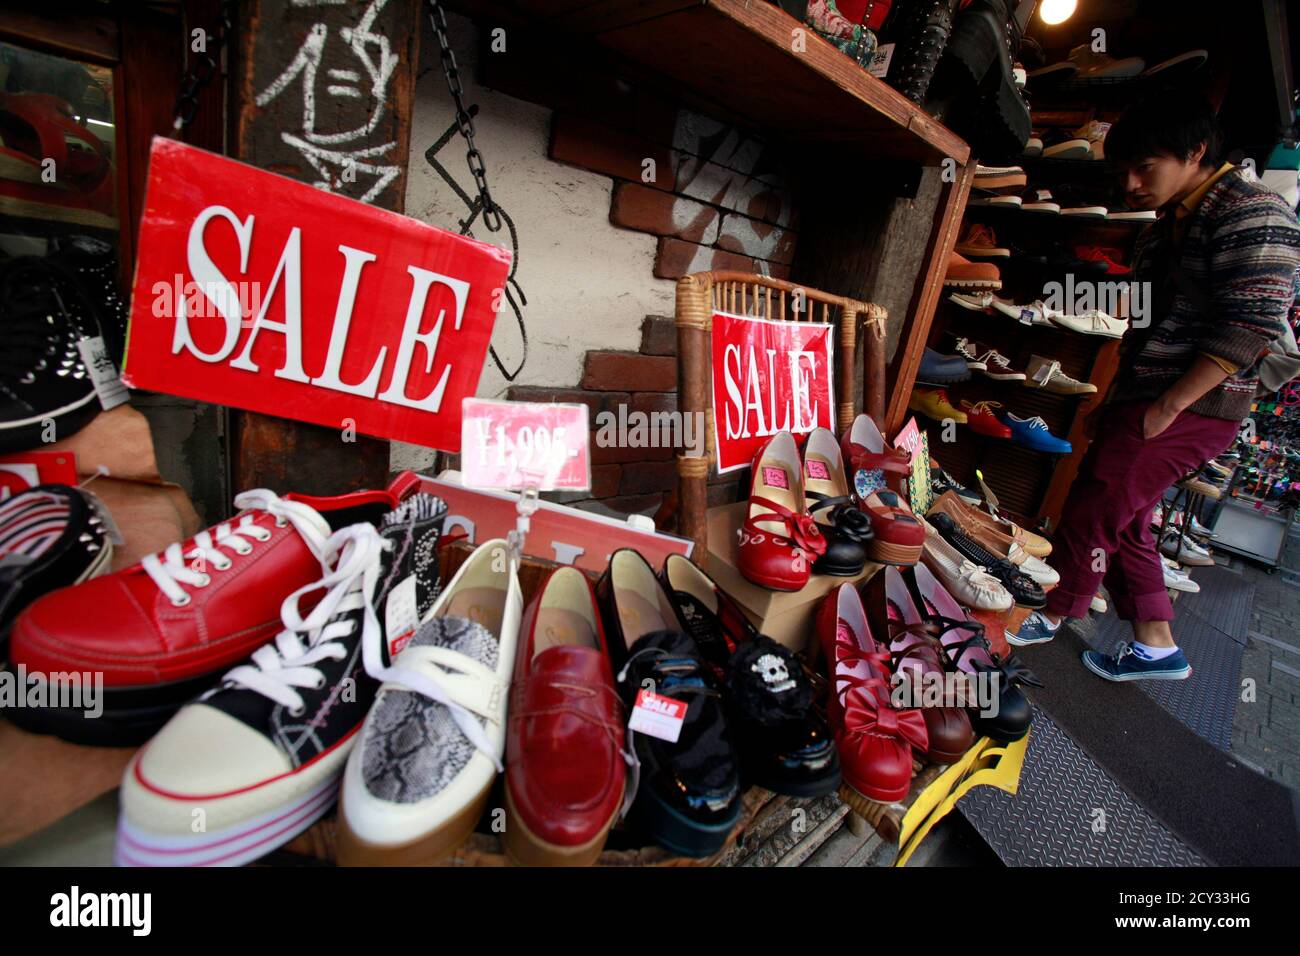 Shoes on sale are displayed outside a store in Tokyo's Harajuku shopping  district October 26, 2012. Japan remains mired in deflation, price data  showed on Friday, piling pressure on the central bank